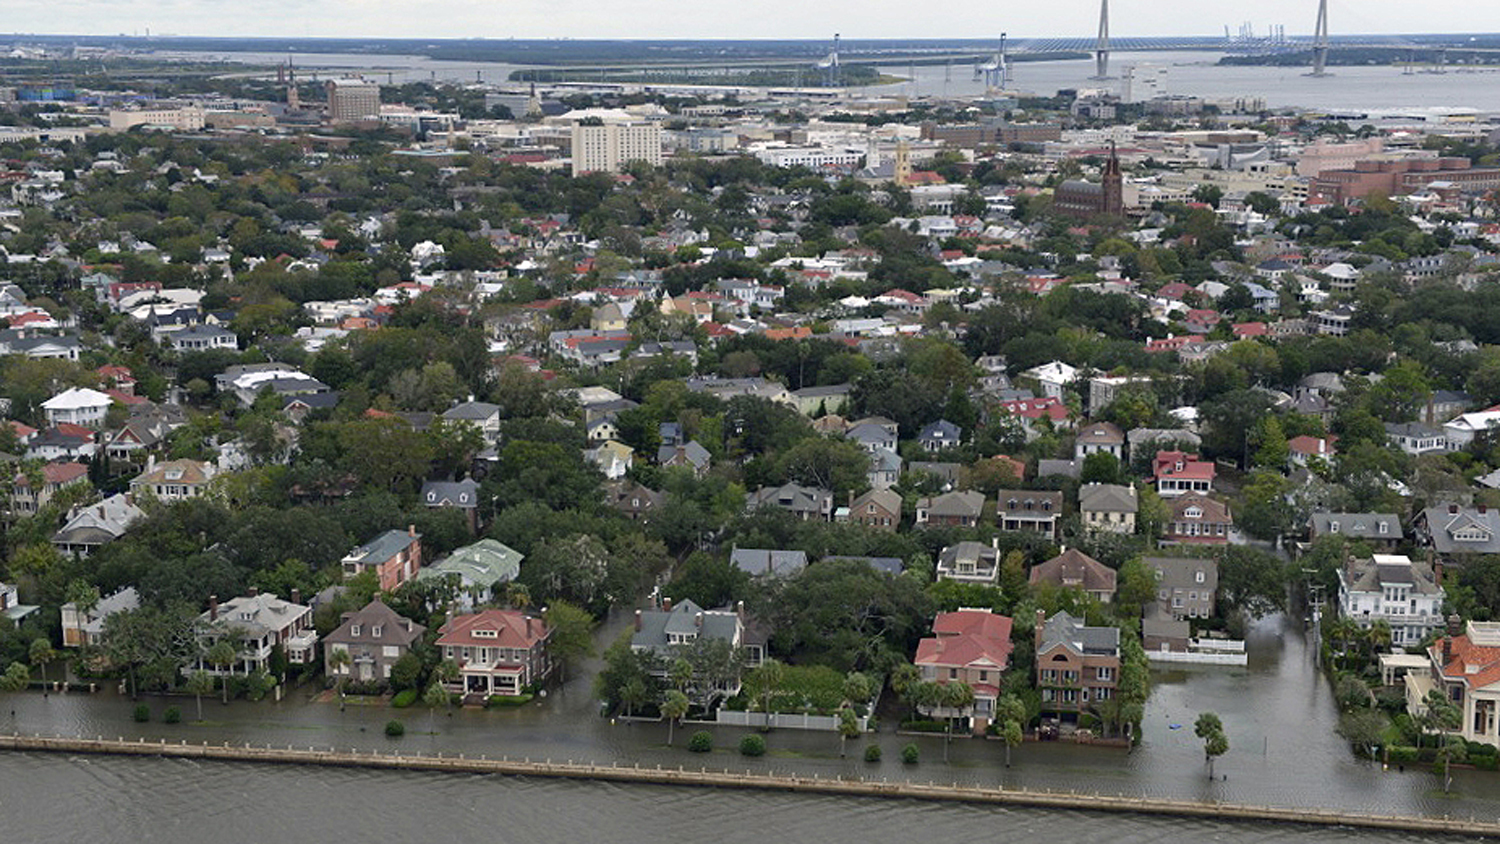 17 Ideas For What To Do In Charleston, South Carolina